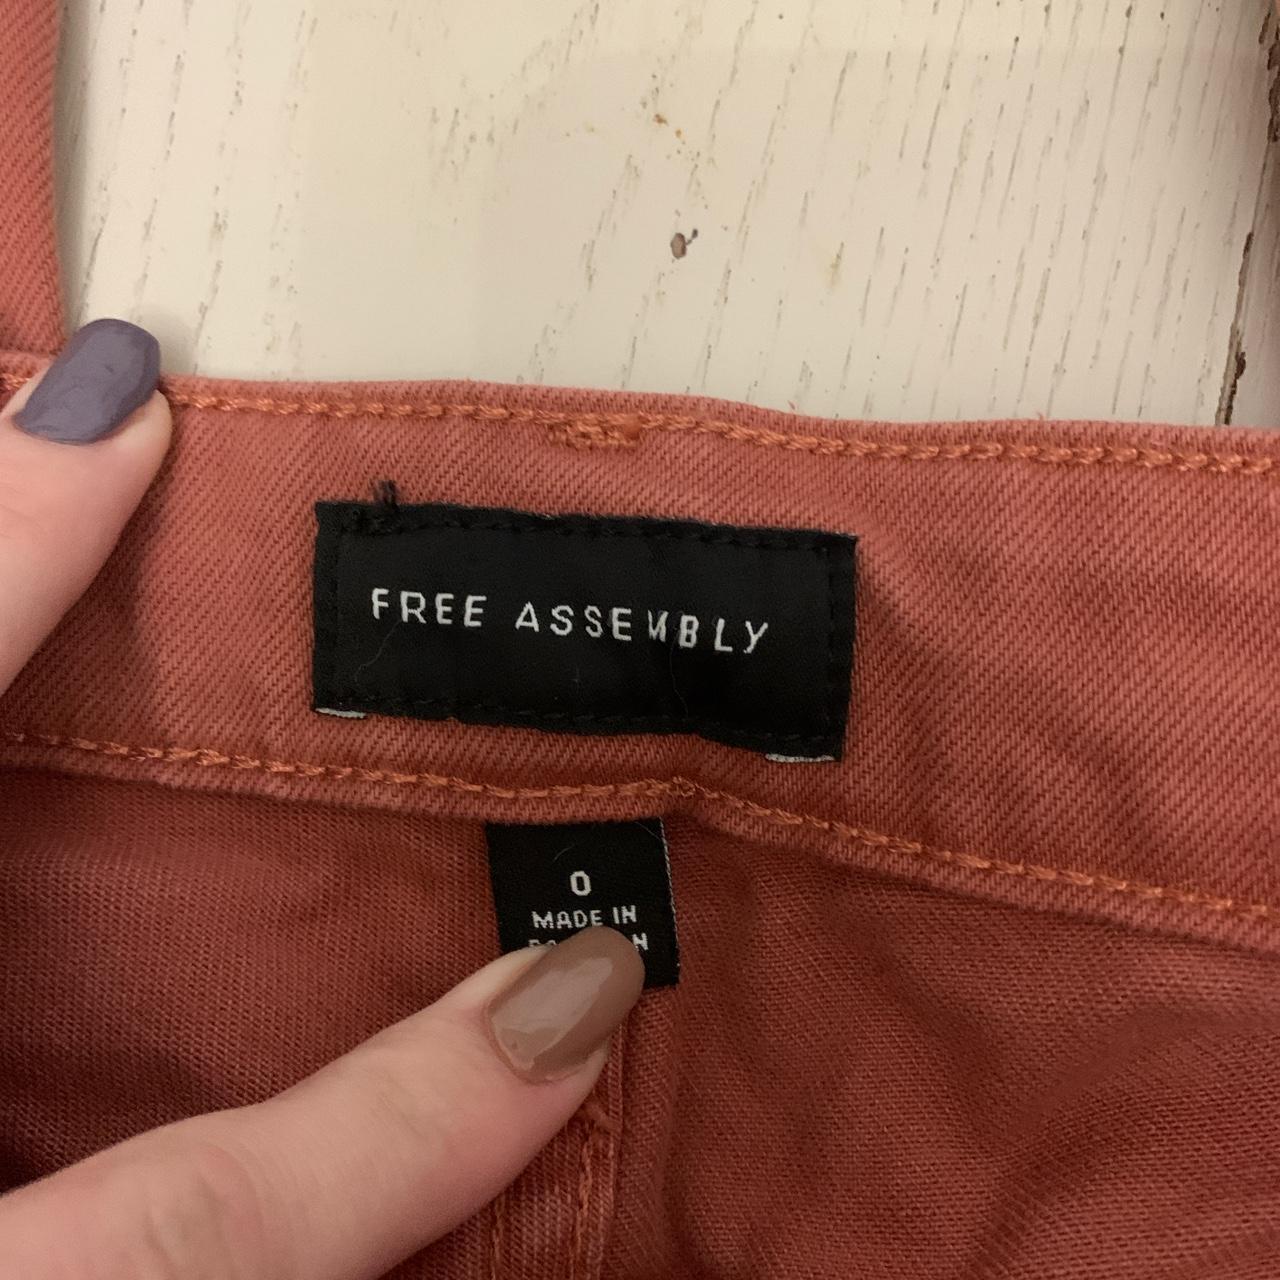 Product Image 4 - Free assembly jeans that are